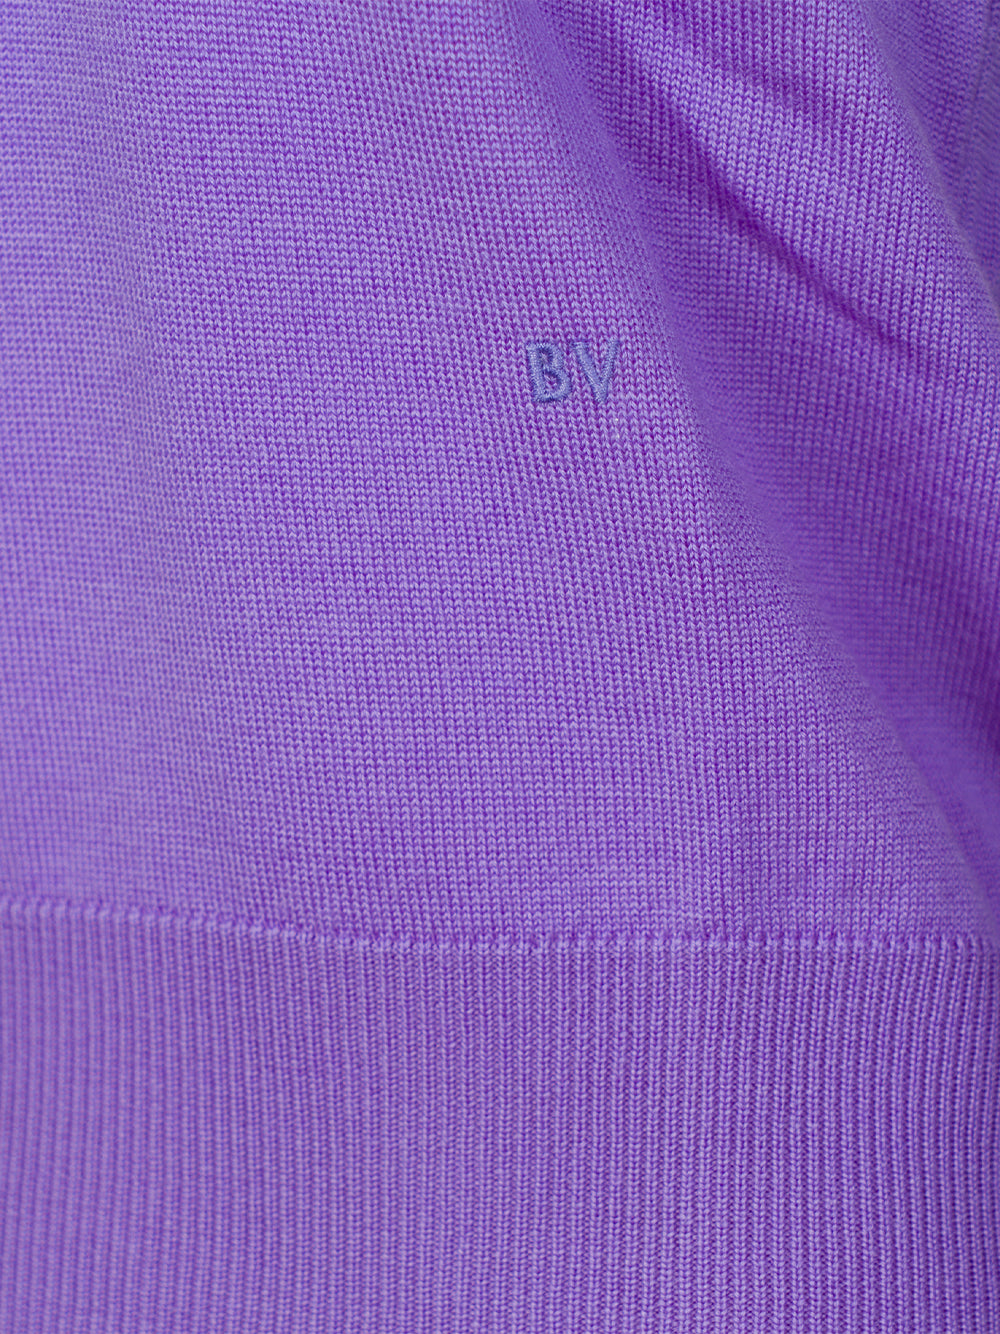 "Bv" embroidery wool jumper